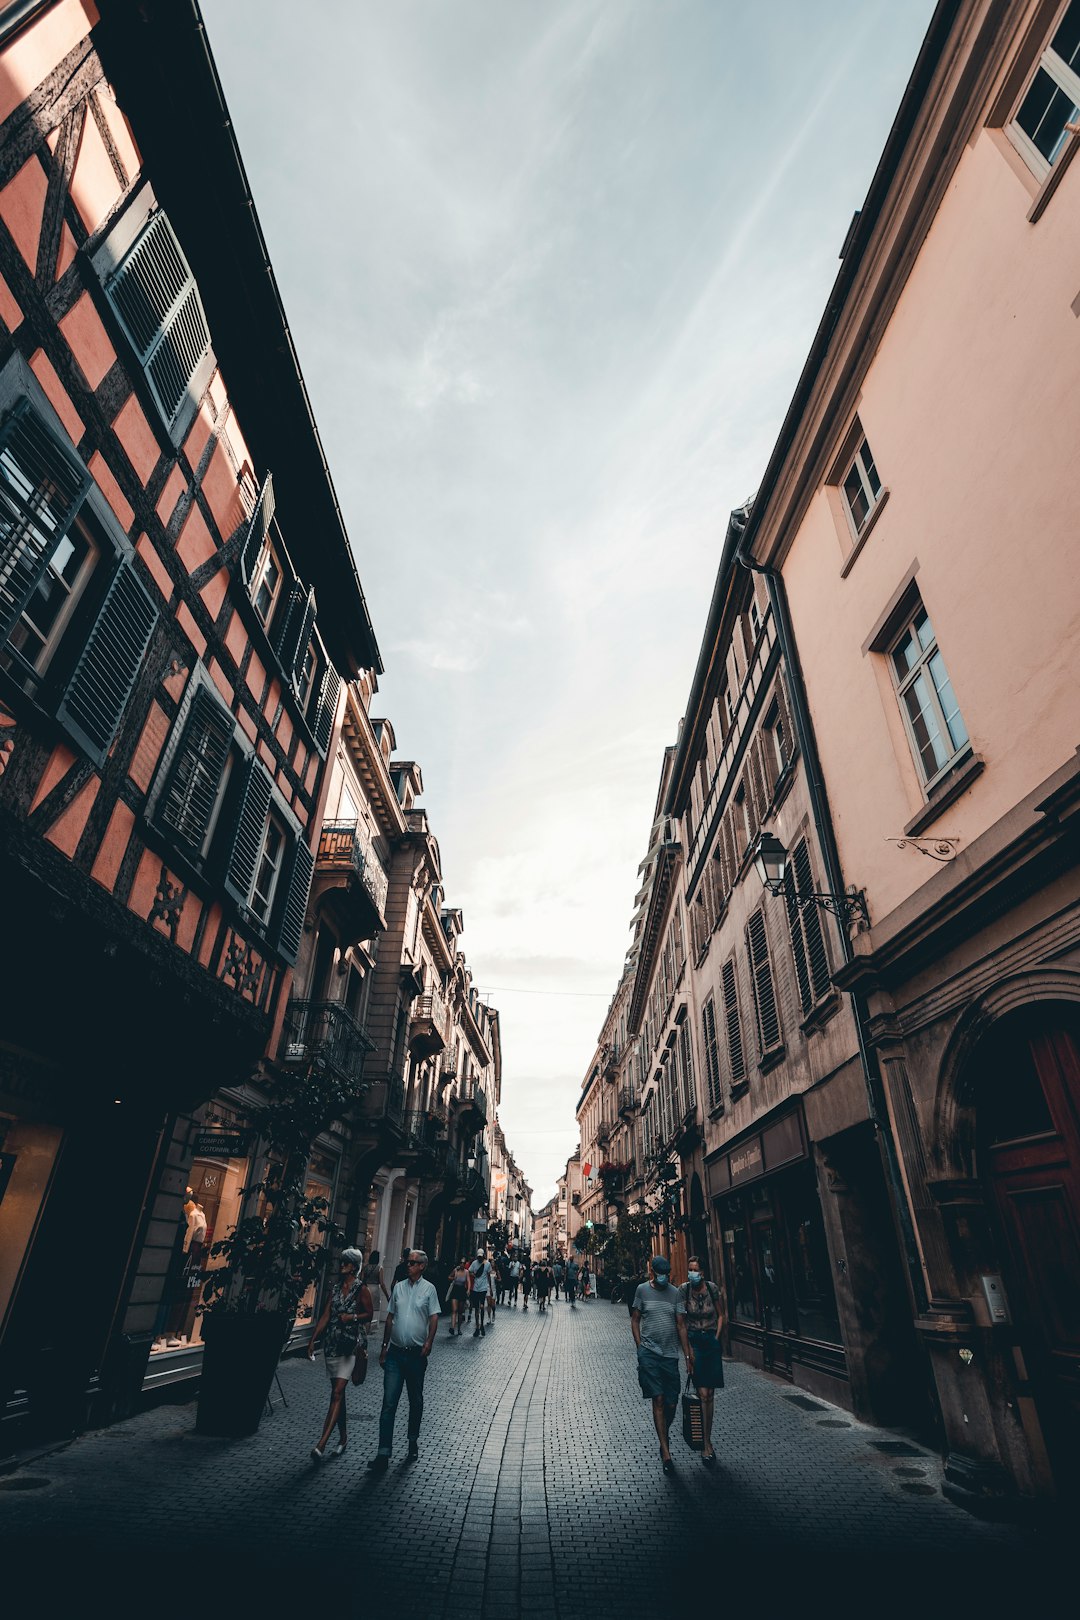 travelers stories about Town in Strasbourg, France